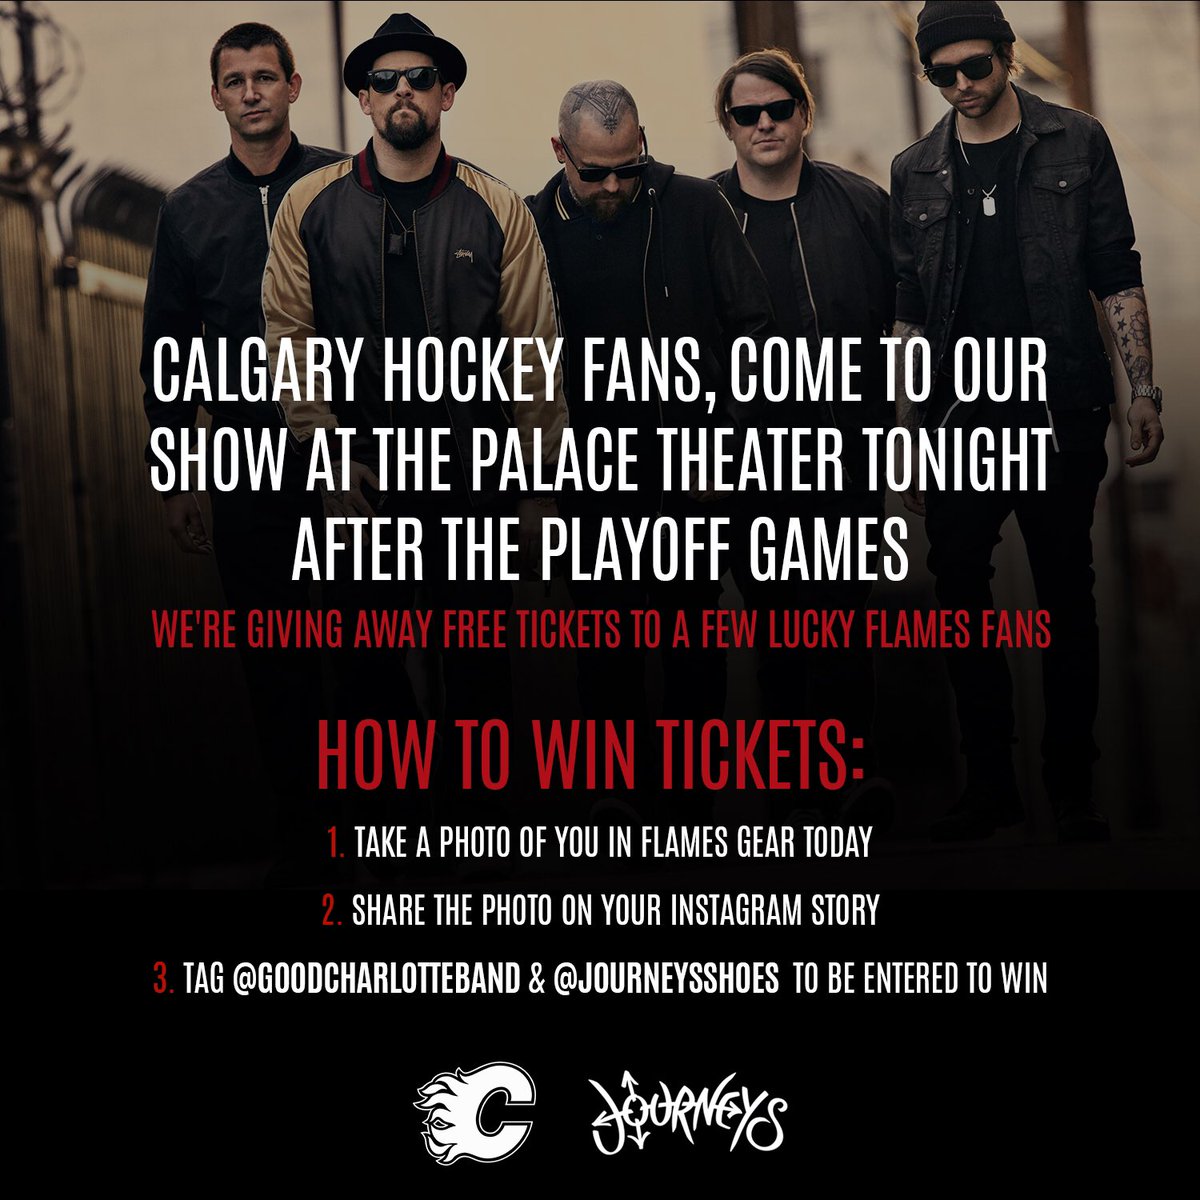 RT @GoodCharlotte: Come see GC for free
in CALGARY!! https://t.co/7hado6CZzf